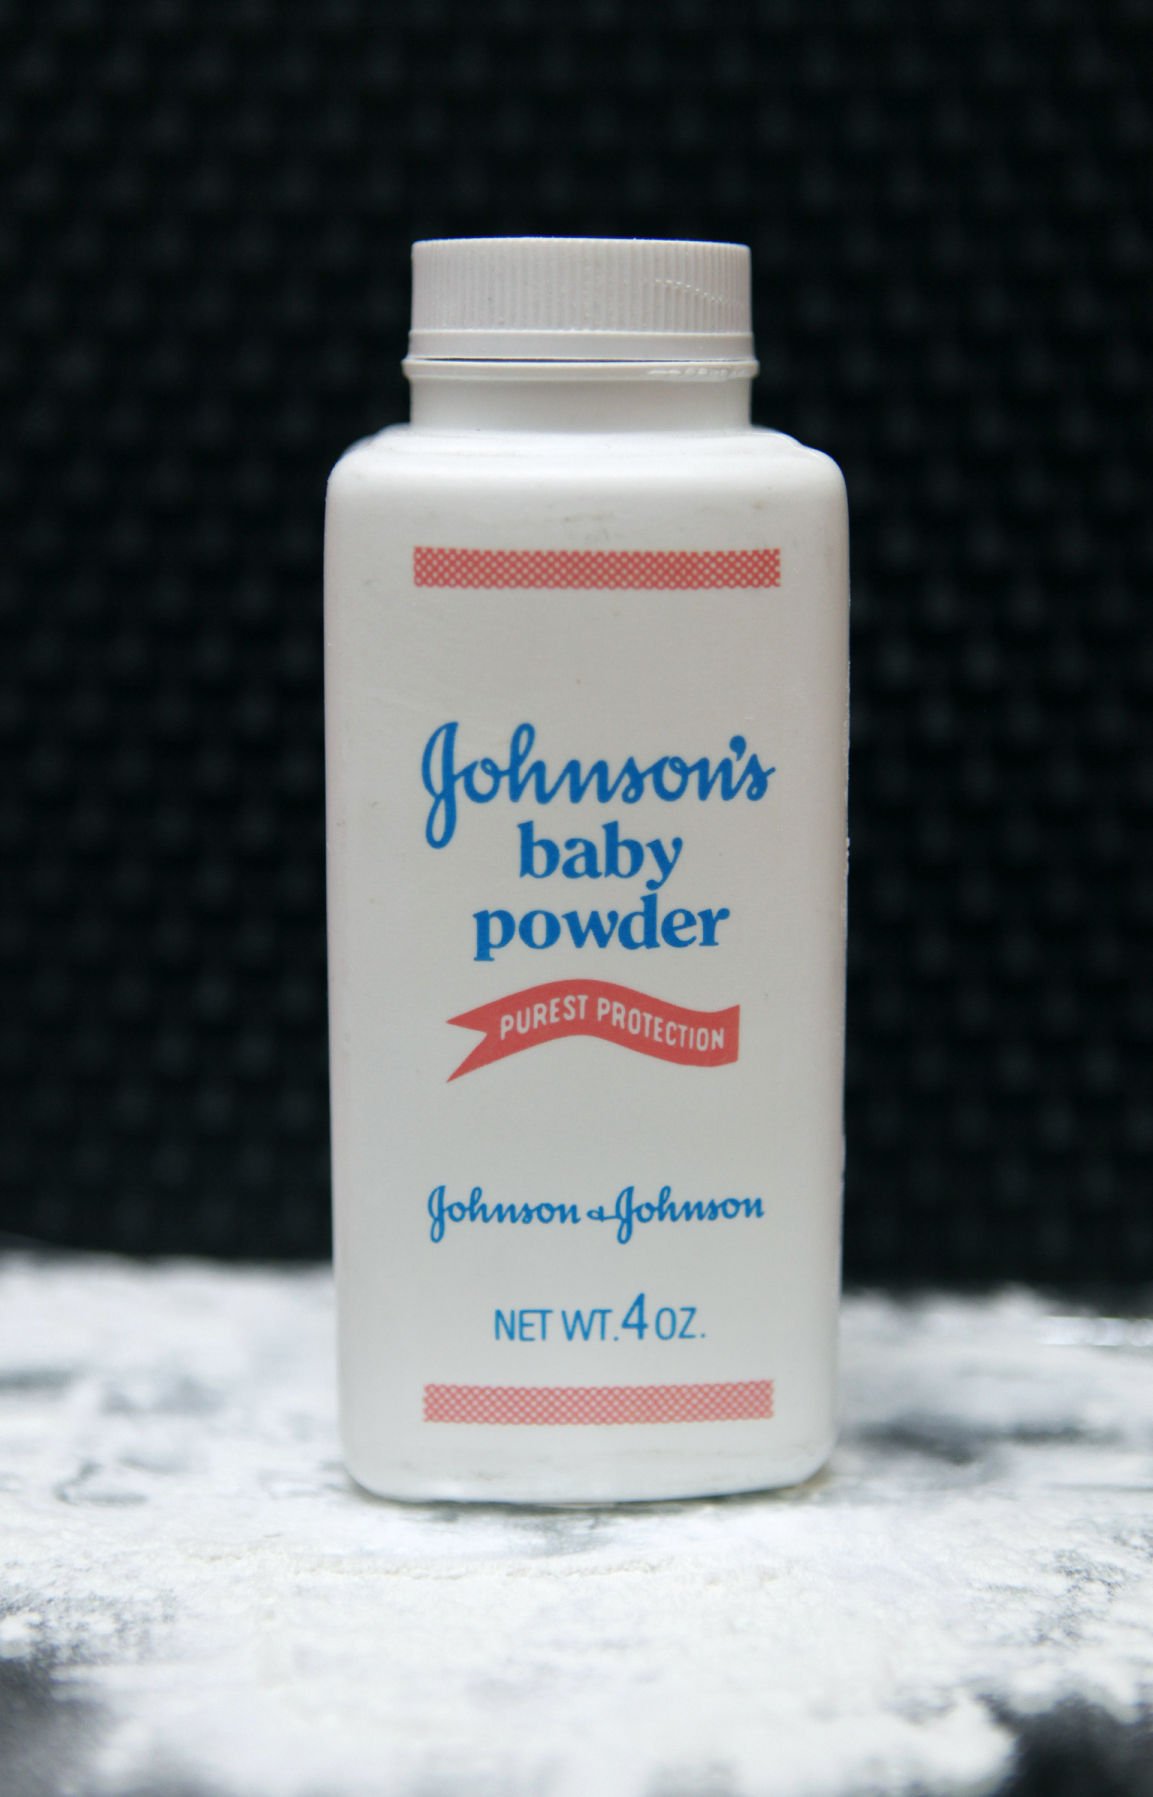 Concerns about baby powder safety after huge jury verdicts